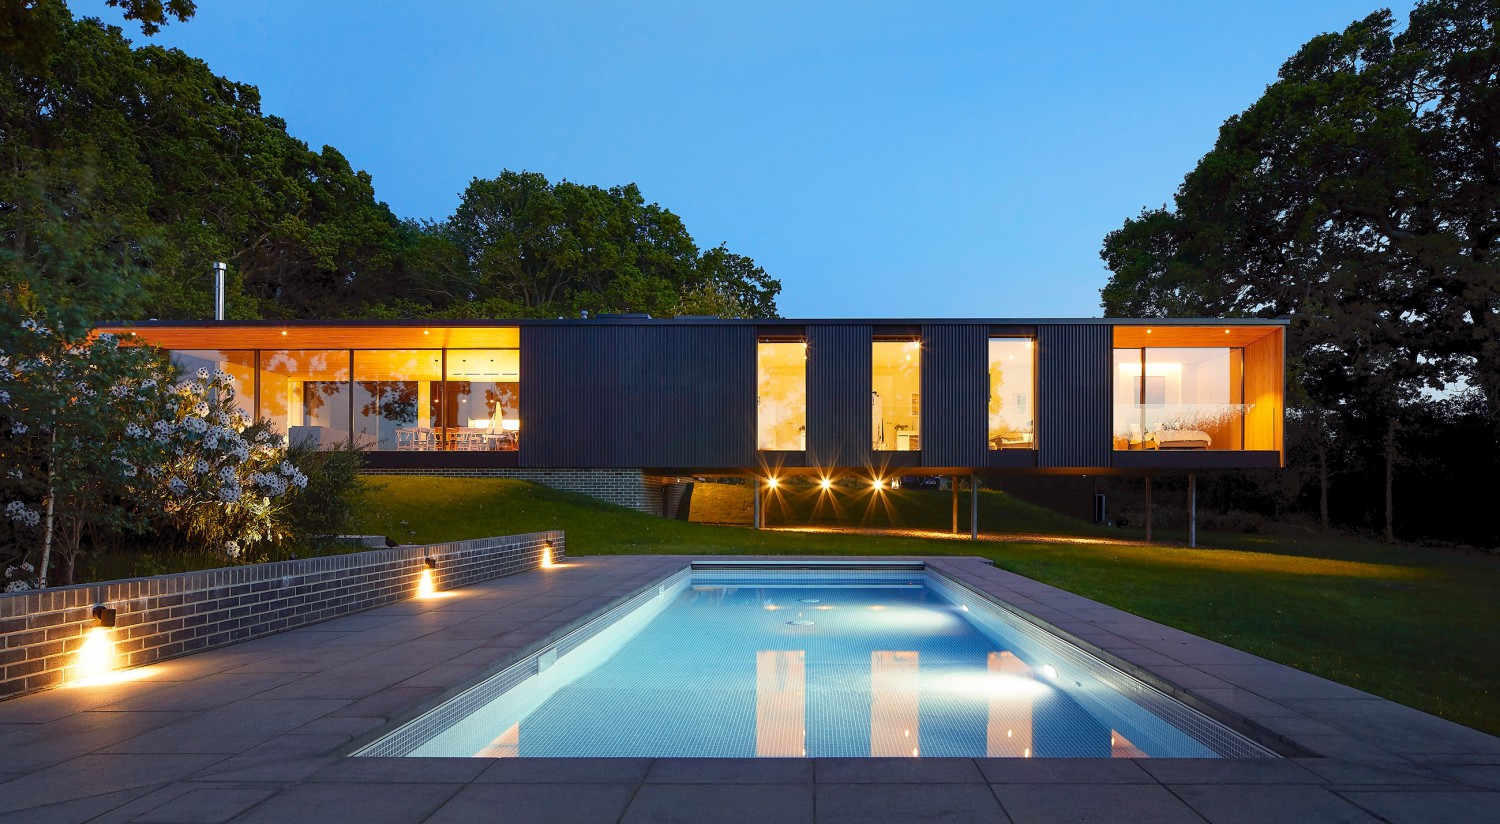 Strom Architects Private House Isle of Wight Hufton+Crow 023 v2